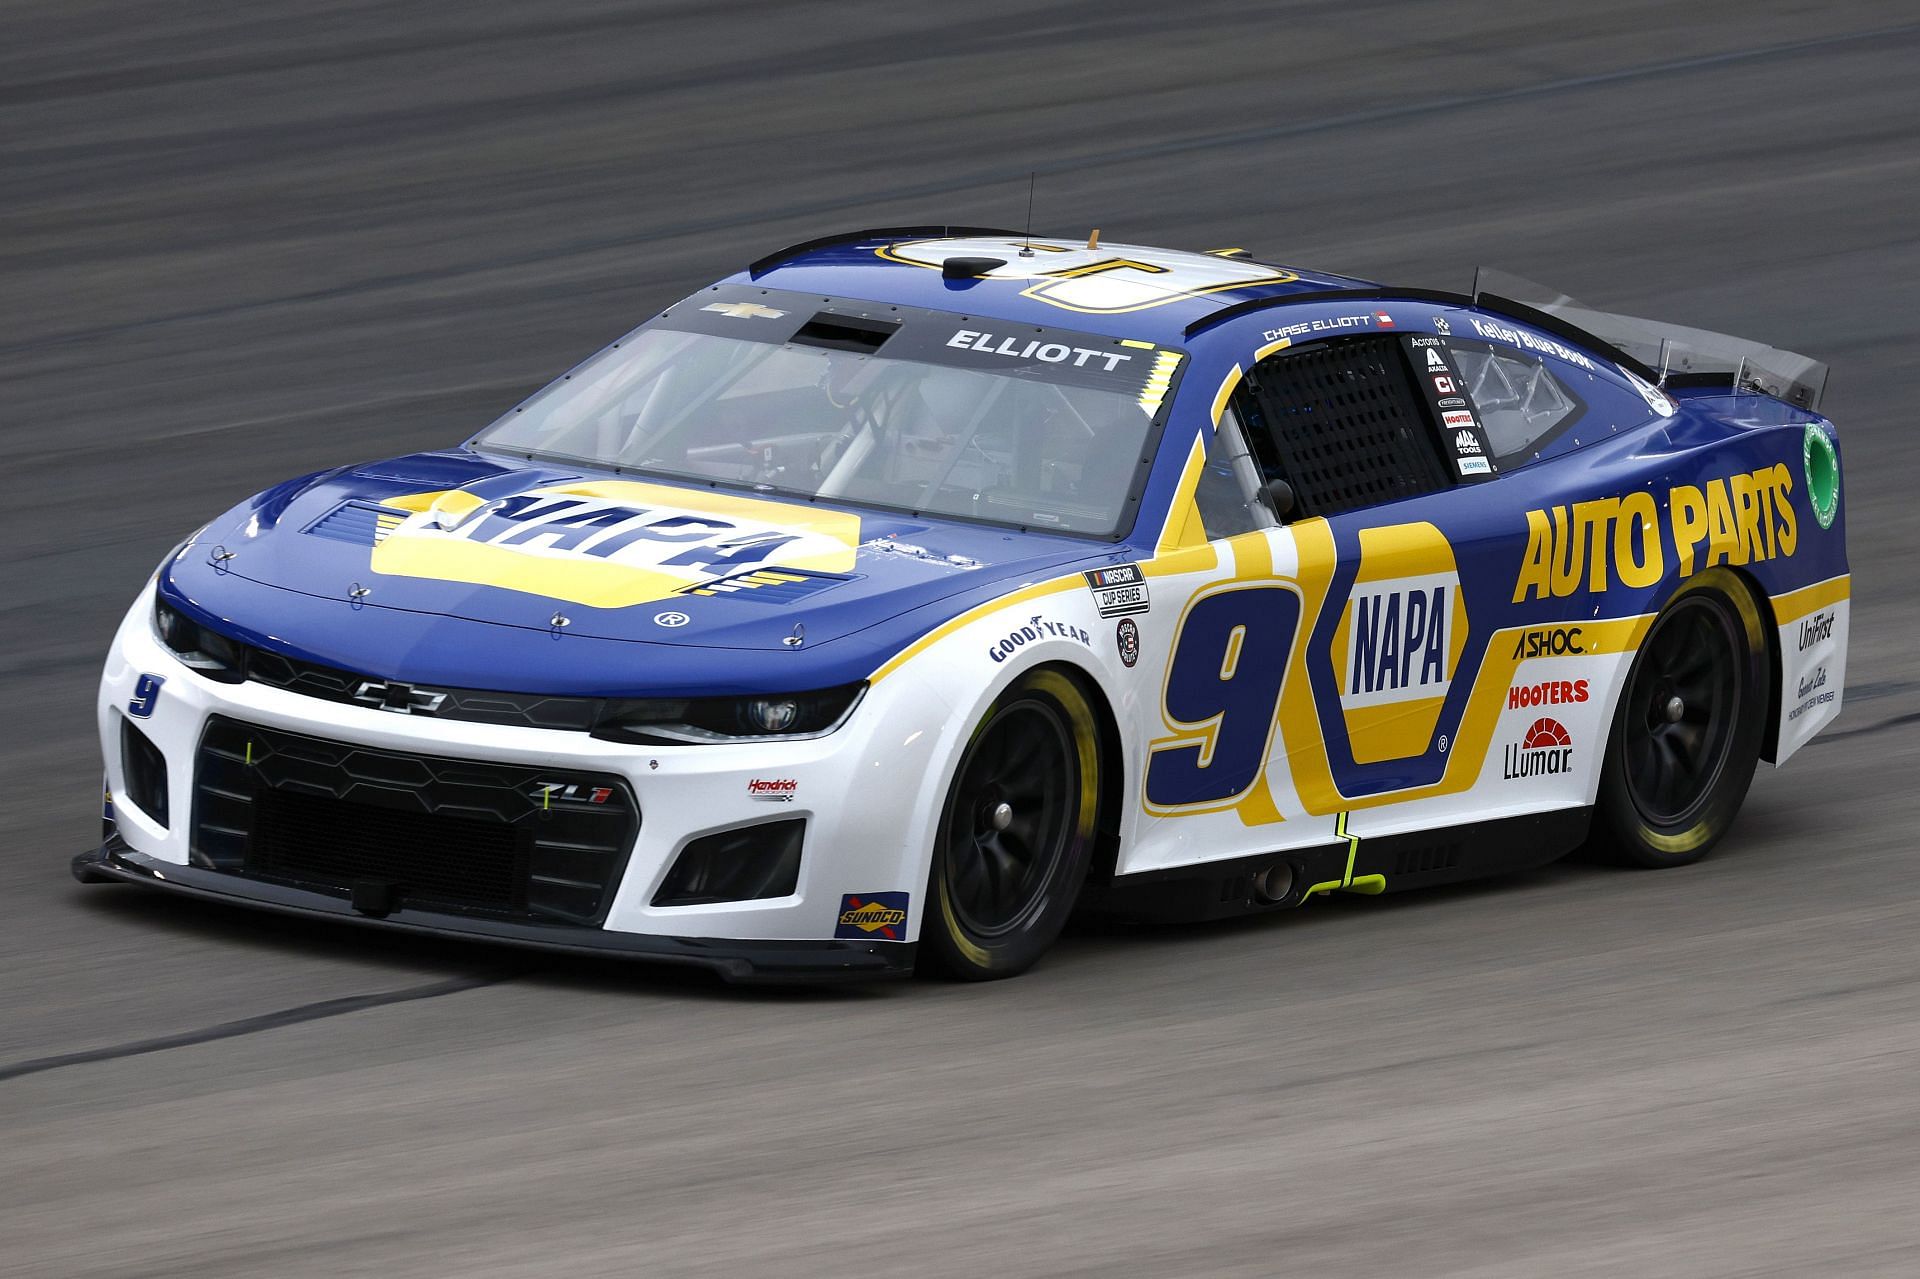 Chase Elliott drives during qualifying for the 2022 NASCAR Cup Series All-Star Race at Texas Motor Speedway in Fort Worth, Texas. (Photo by Jared C. Tilton/Getty Images)